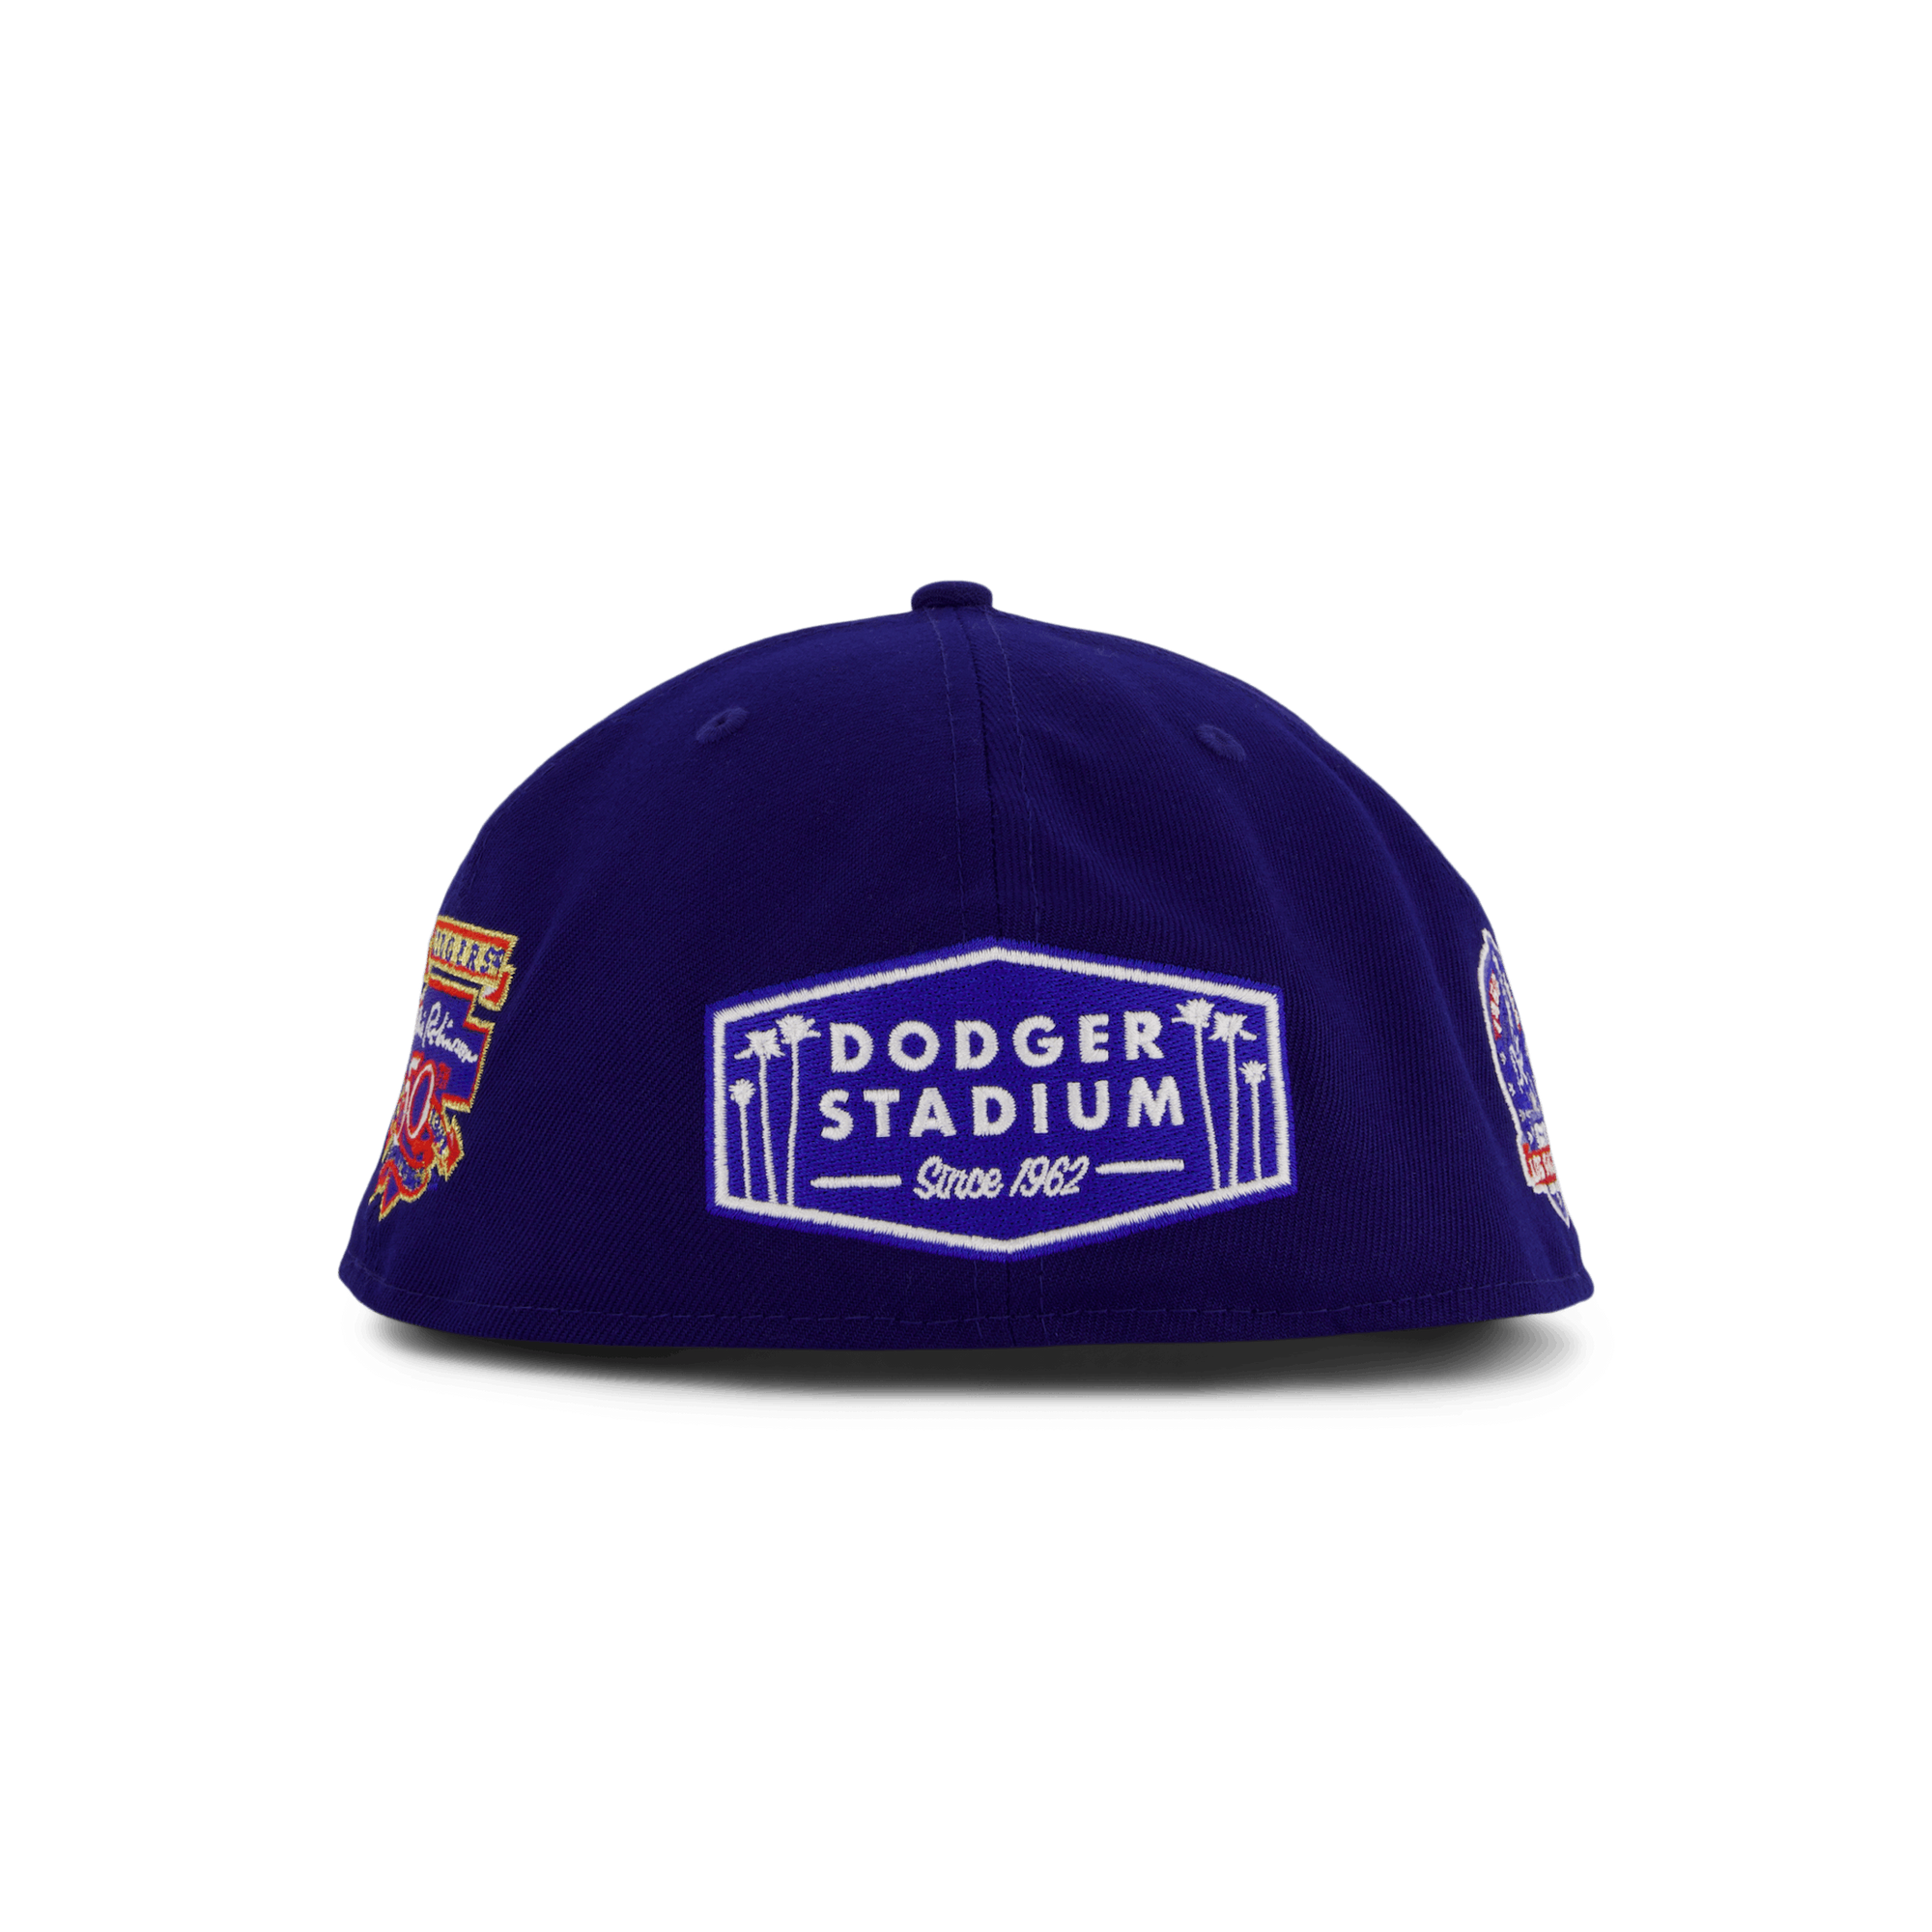 Coops Multi Patch 59fifty Dodg Otcwhi